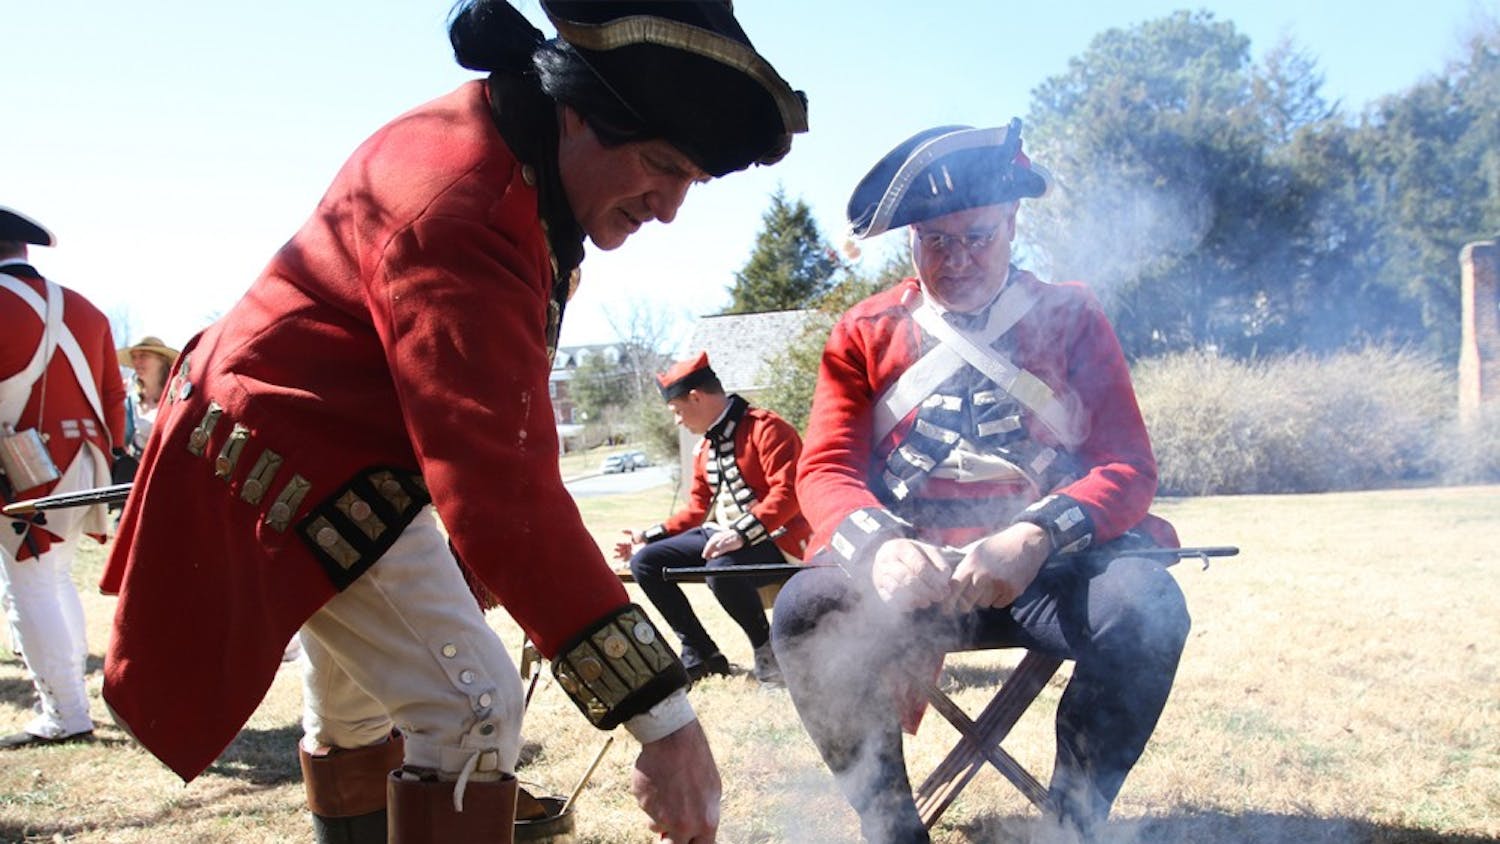 Revolutionary War reenactment as part of Twelfth Annual Revolutionary War Living History Day in Hillsborough Saturday 2-22-14. 

Reenactment of His Majesty's 64th regiment of foot during the year of 1781. 

Right-  Mark Dappert is from Charlotte, reenacting a Sgt., been reenacting for 25 years. Here he is cooking "spotted dog," salt pork and cabbage.

Left- David Snyder is from Efland, reenacting a Captain of Infantry, been reenacting since 1976 and started because of the bicentennial. He has an interest in American history and wanted to learn more about the British side of the story. 